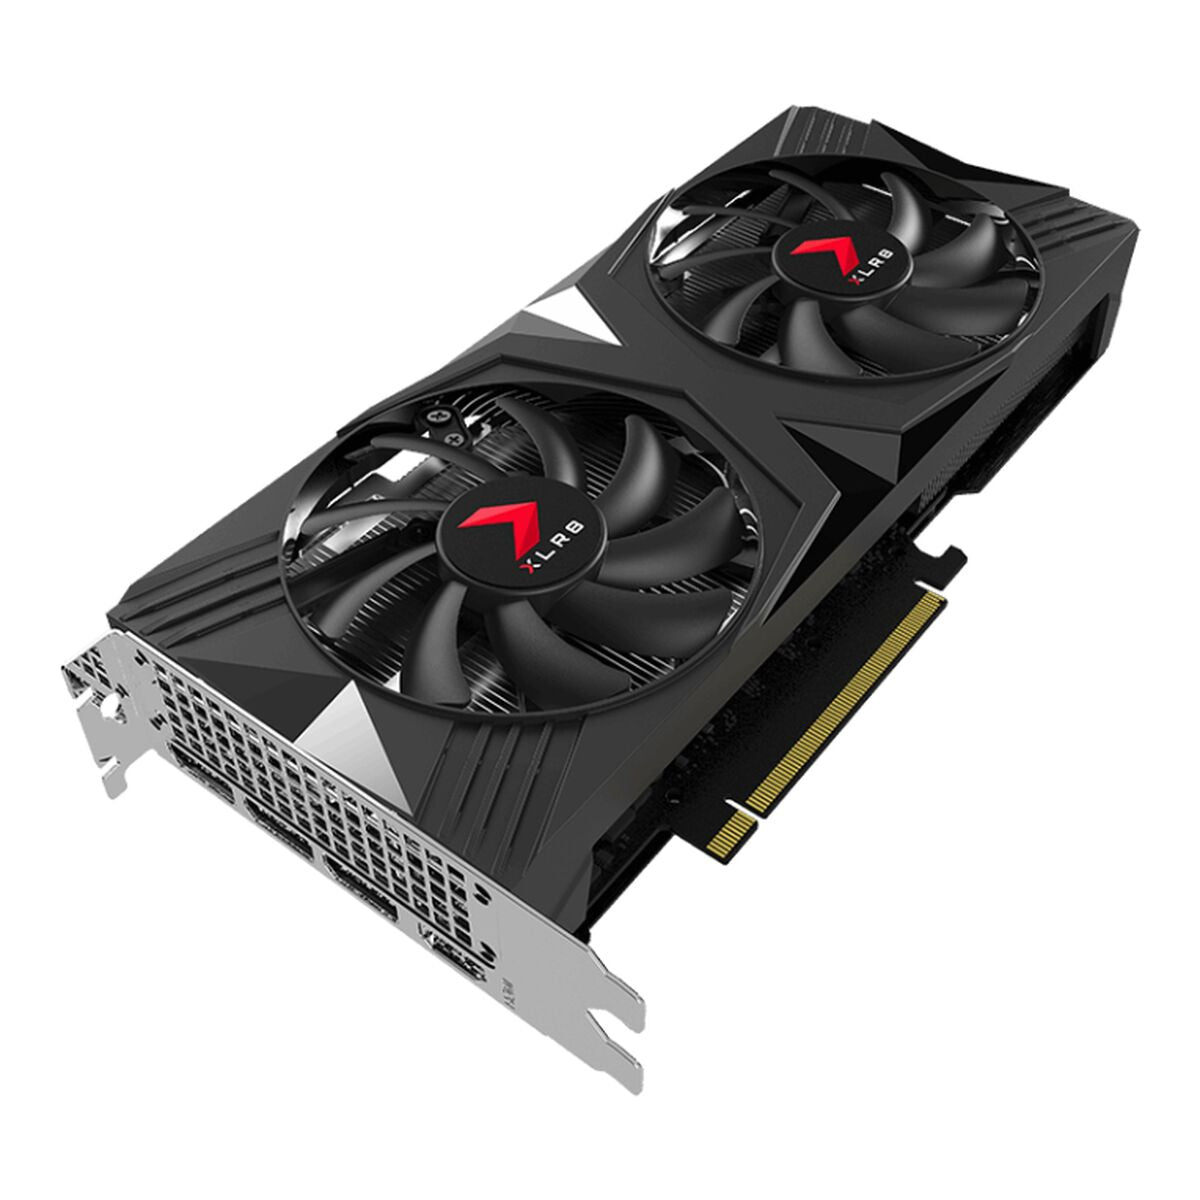 Graphics card PNY VCG4060T16DFXPB1-O Geforce RTX 4060 Ti 16 GB RAM, PNY, Computing, Components, graphics-card-pny-vcg4060t16dfxpb1-o-geforce-rtx-4060-ti-16-gb-ram, Brand_PNY, category-reference-2609, category-reference-2803, category-reference-2812, category-reference-t-19685, category-reference-t-19912, category-reference-t-21360, category-reference-t-25665, computers / components, Condition_NEW, Price_500 - 600, Teleworking, RiotNook